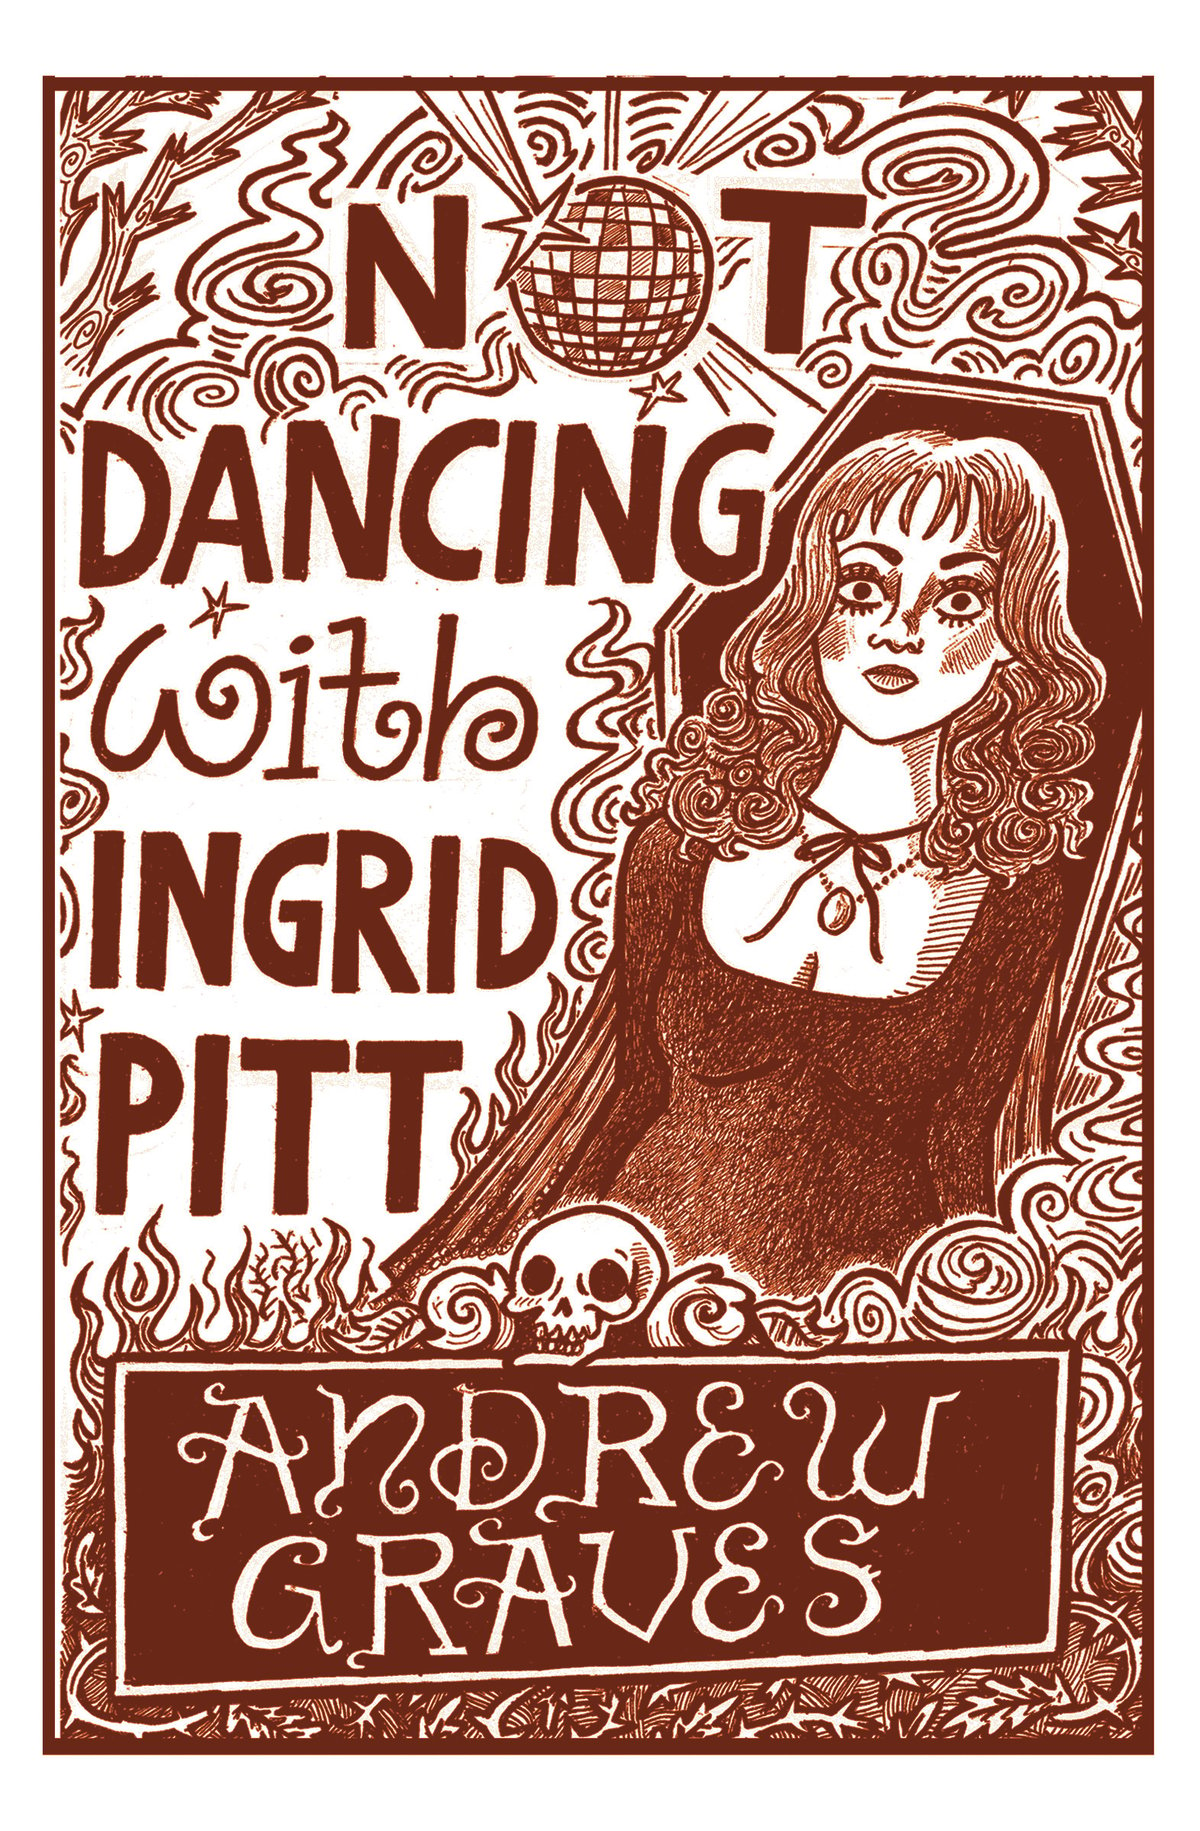 Image of Not Dancing with Ingrid Pitt by Andrew Graves